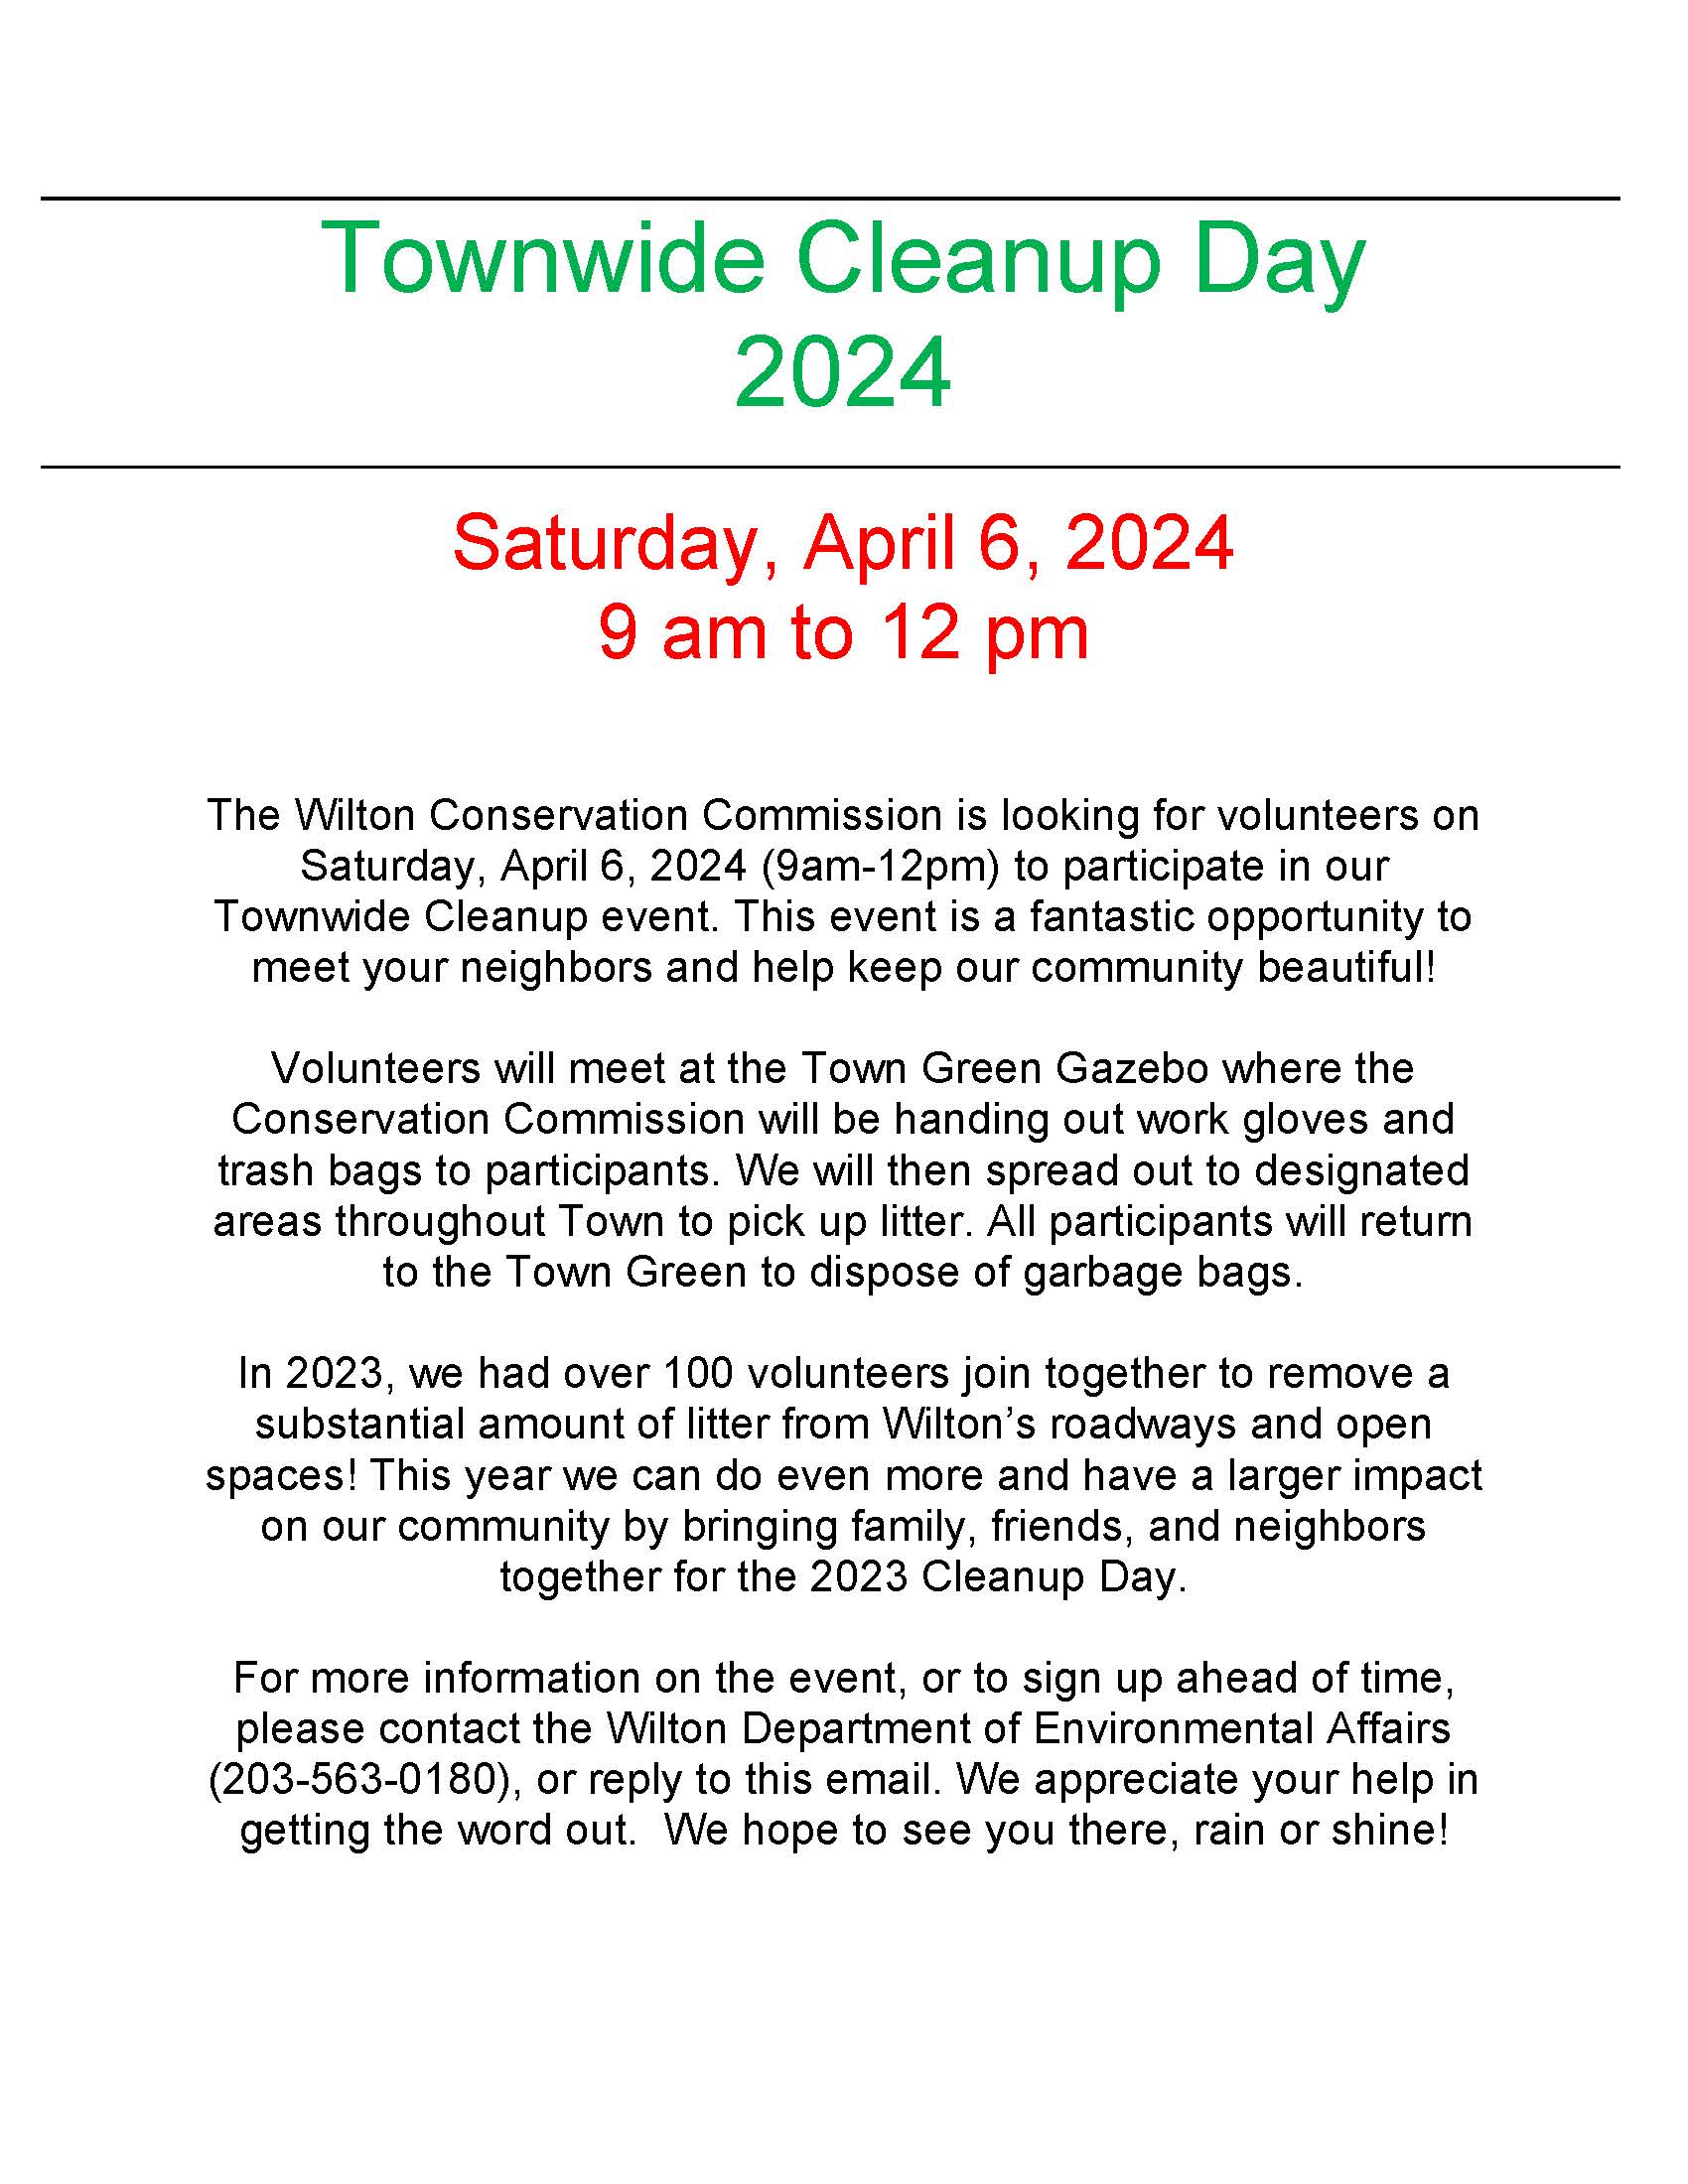 Townwide Cleanup Day 24